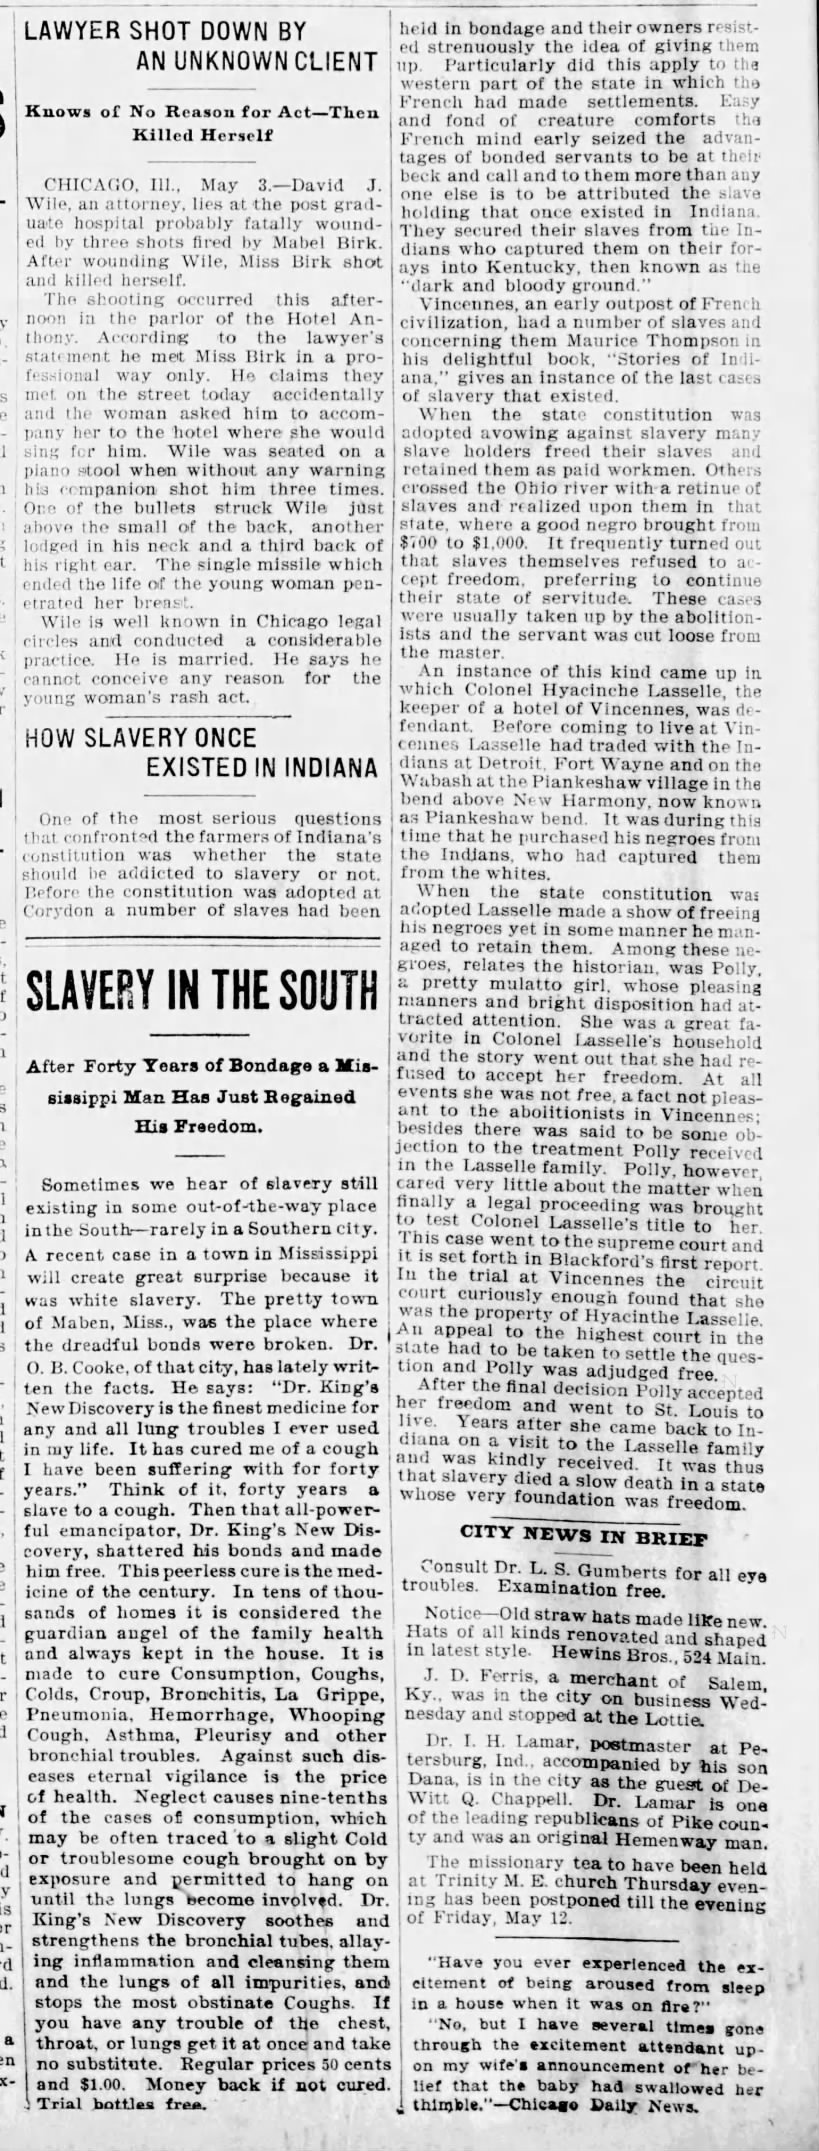 How Slavery Once Existed in Indiana